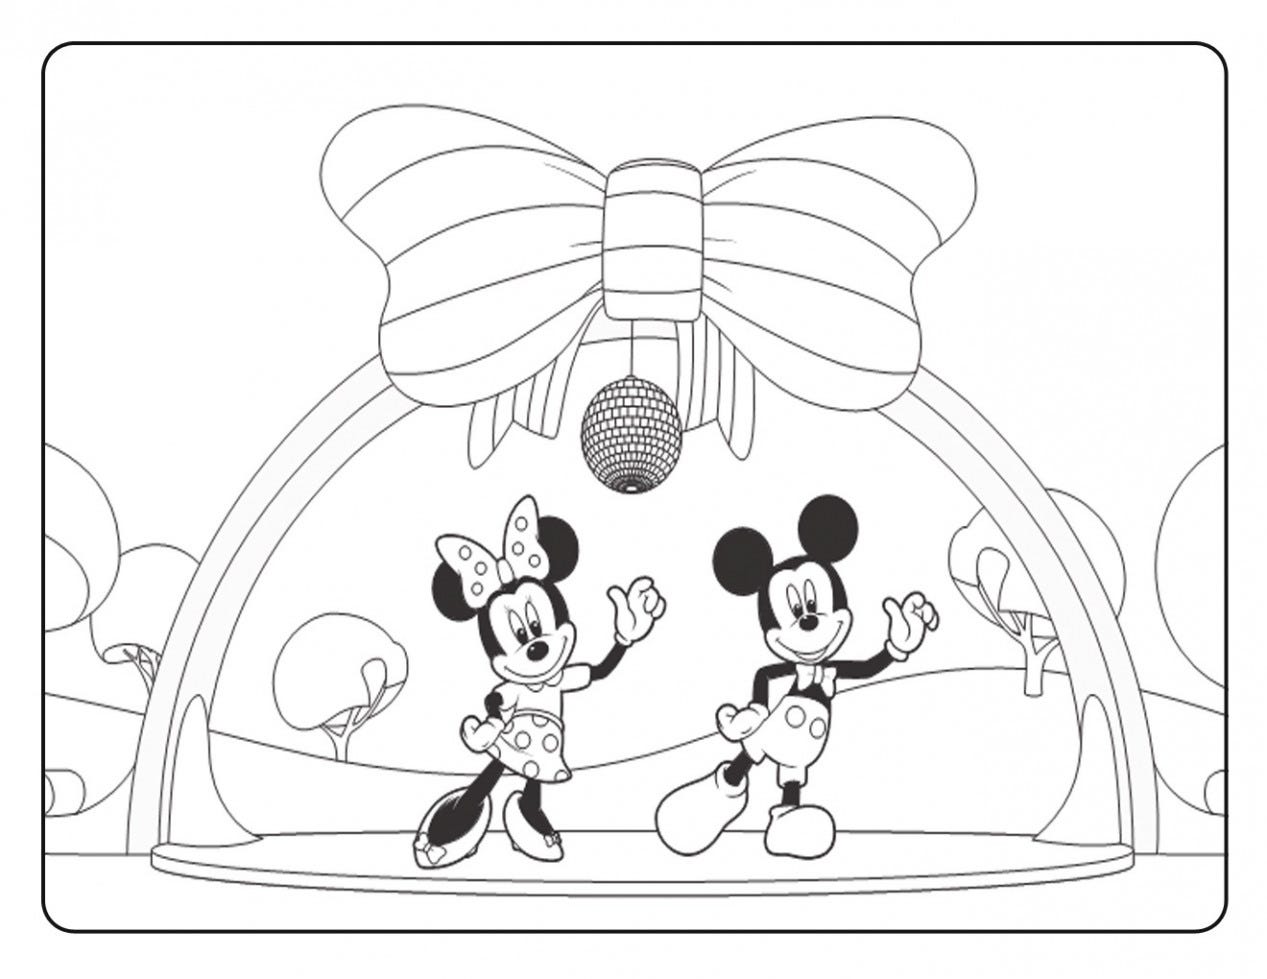 Free Printable Mickey Mouse Clubhouse Coloring Pages | by Ragilwk | Medium